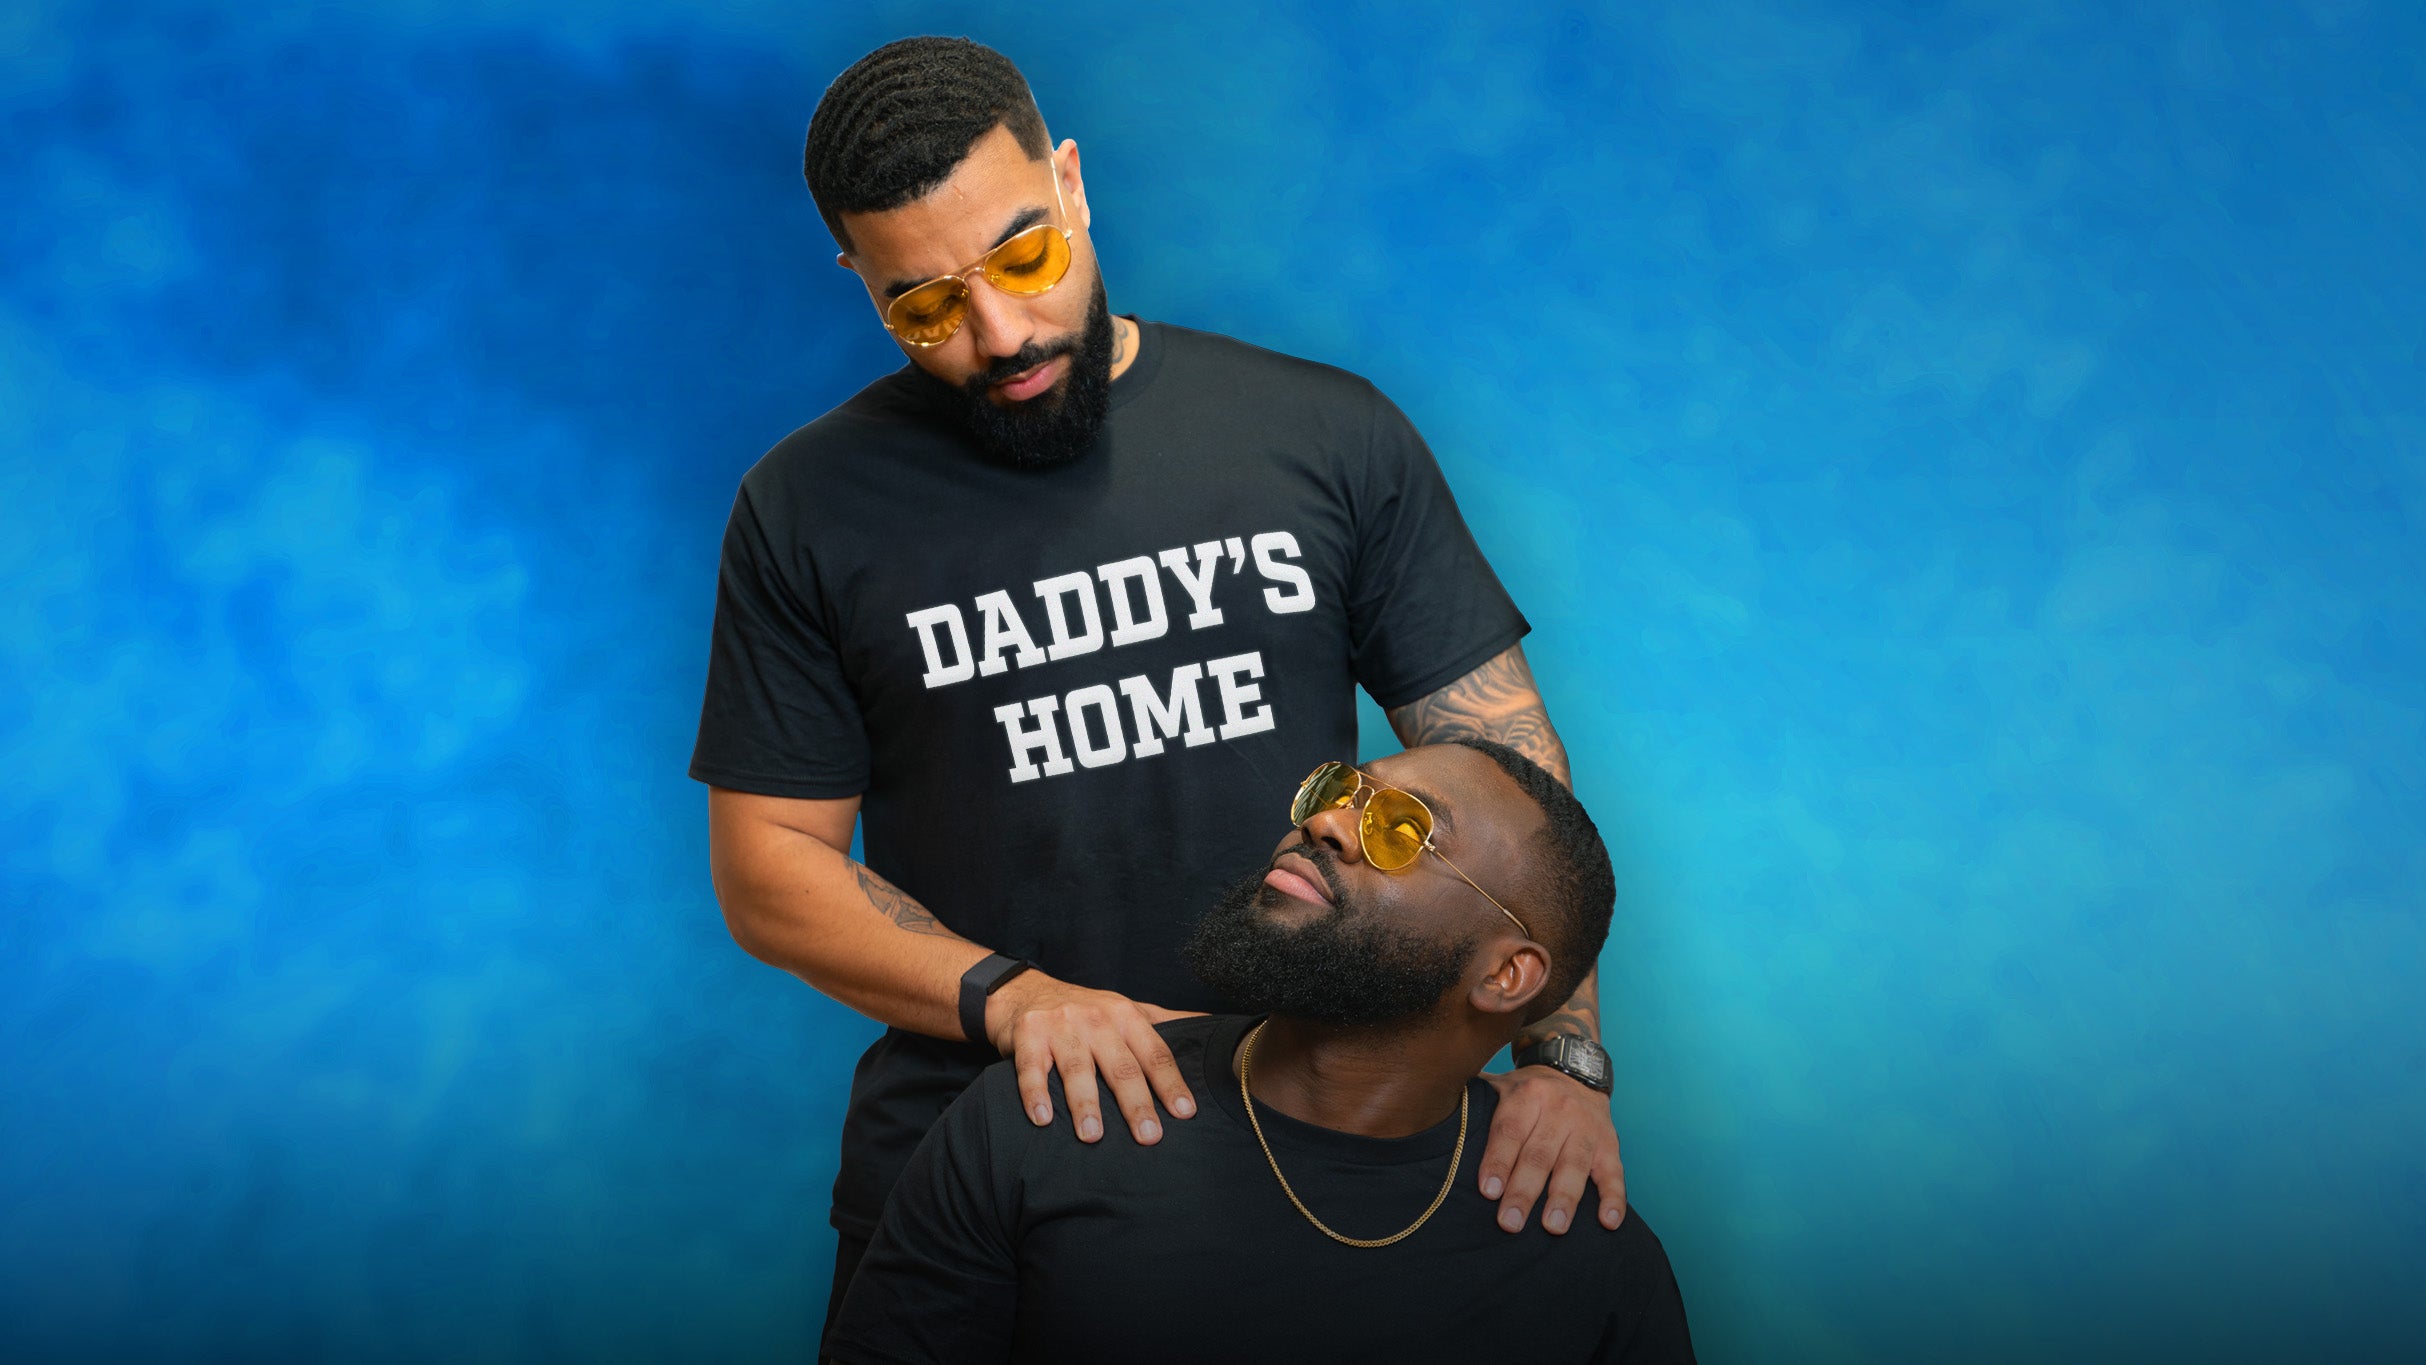 ShxtsNGigs: Daddy's Home Tour presale passcode for show tickets in Chicago, IL (Athenaeum Theatre)